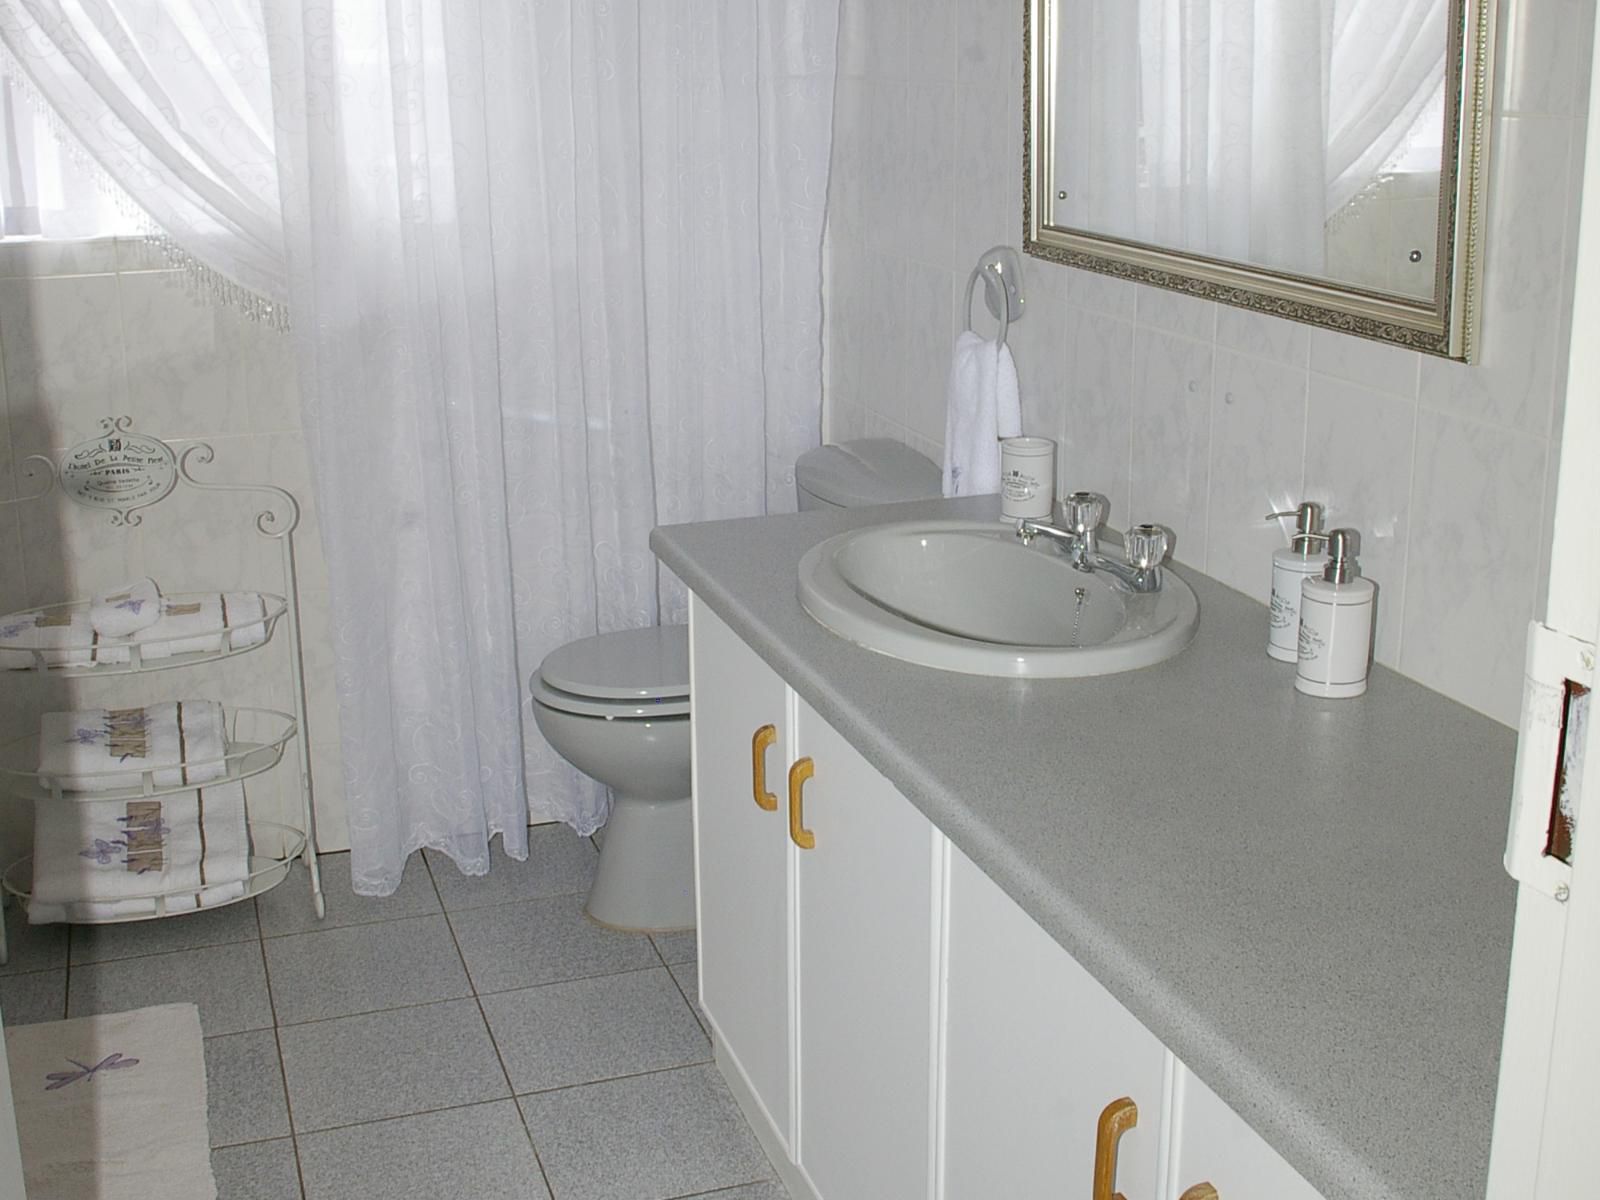 Anne S Place Potchefstroom North West Province South Africa Colorless, Bathroom